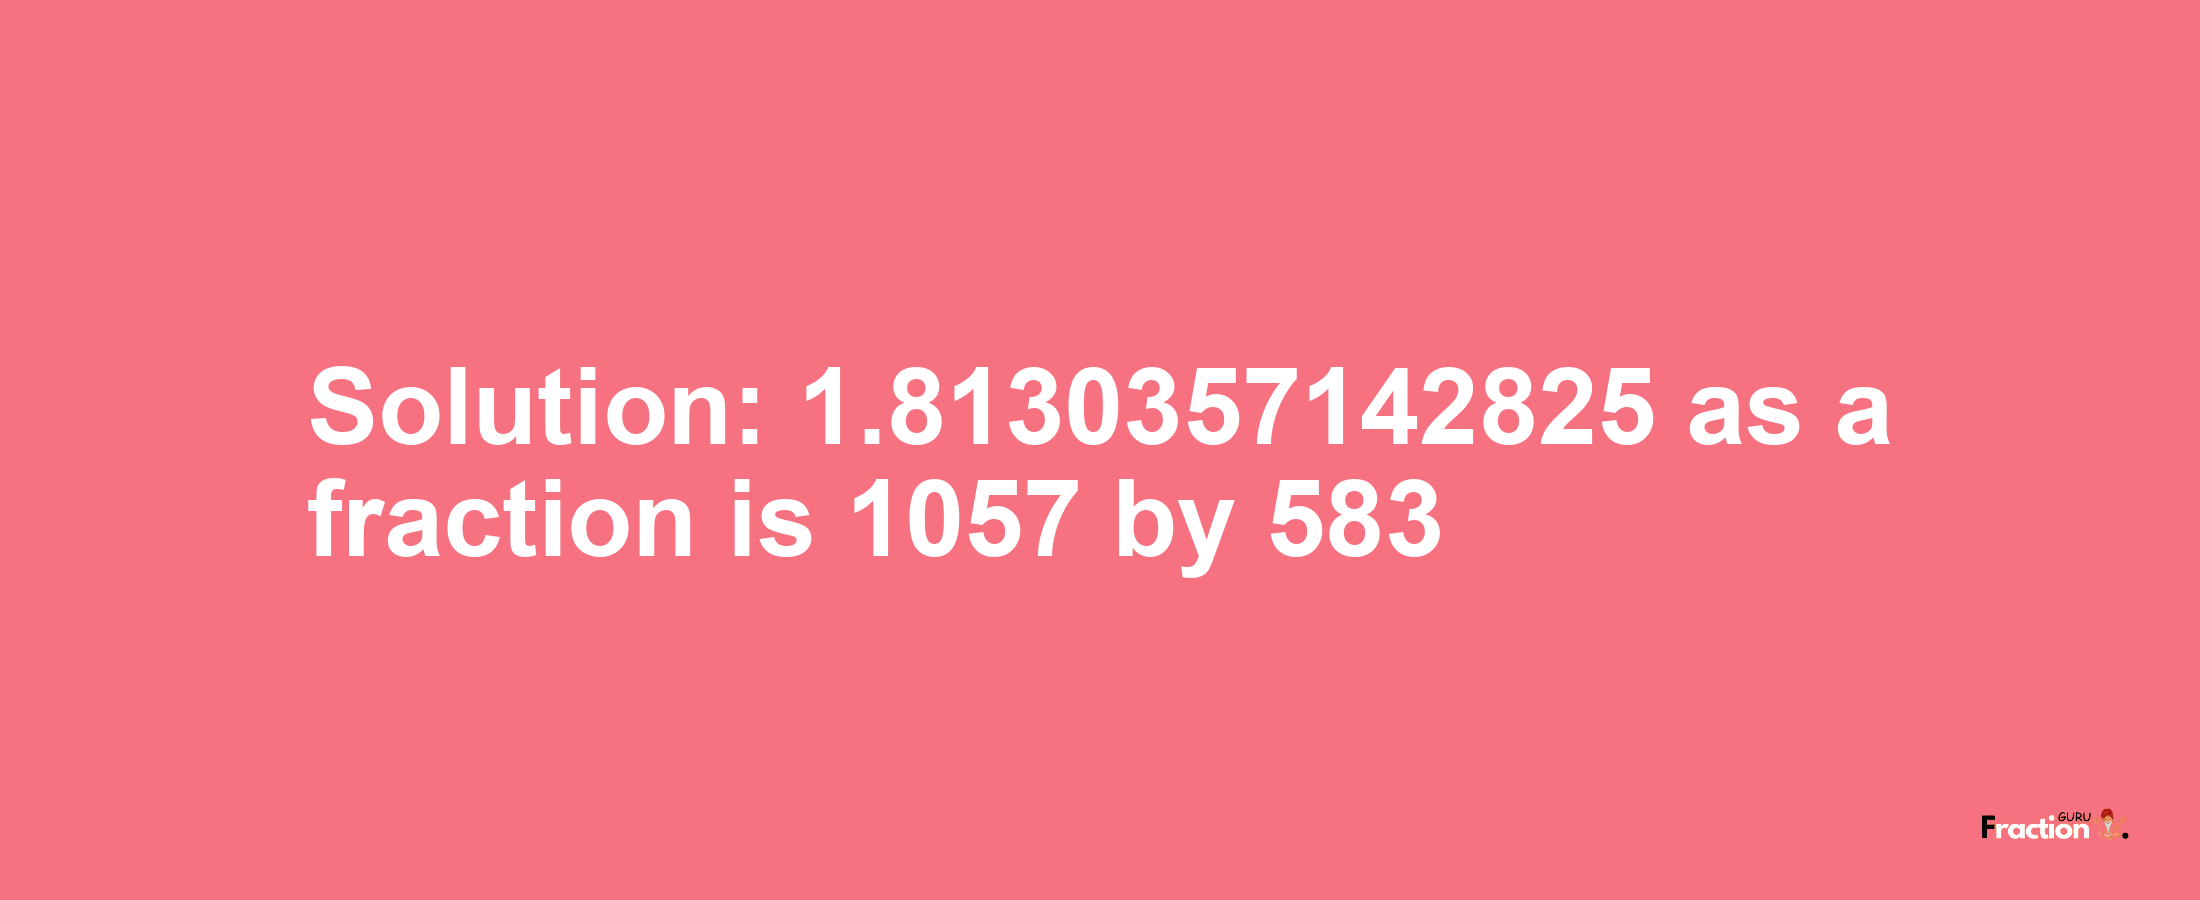 Solution:1.8130357142825 as a fraction is 1057/583